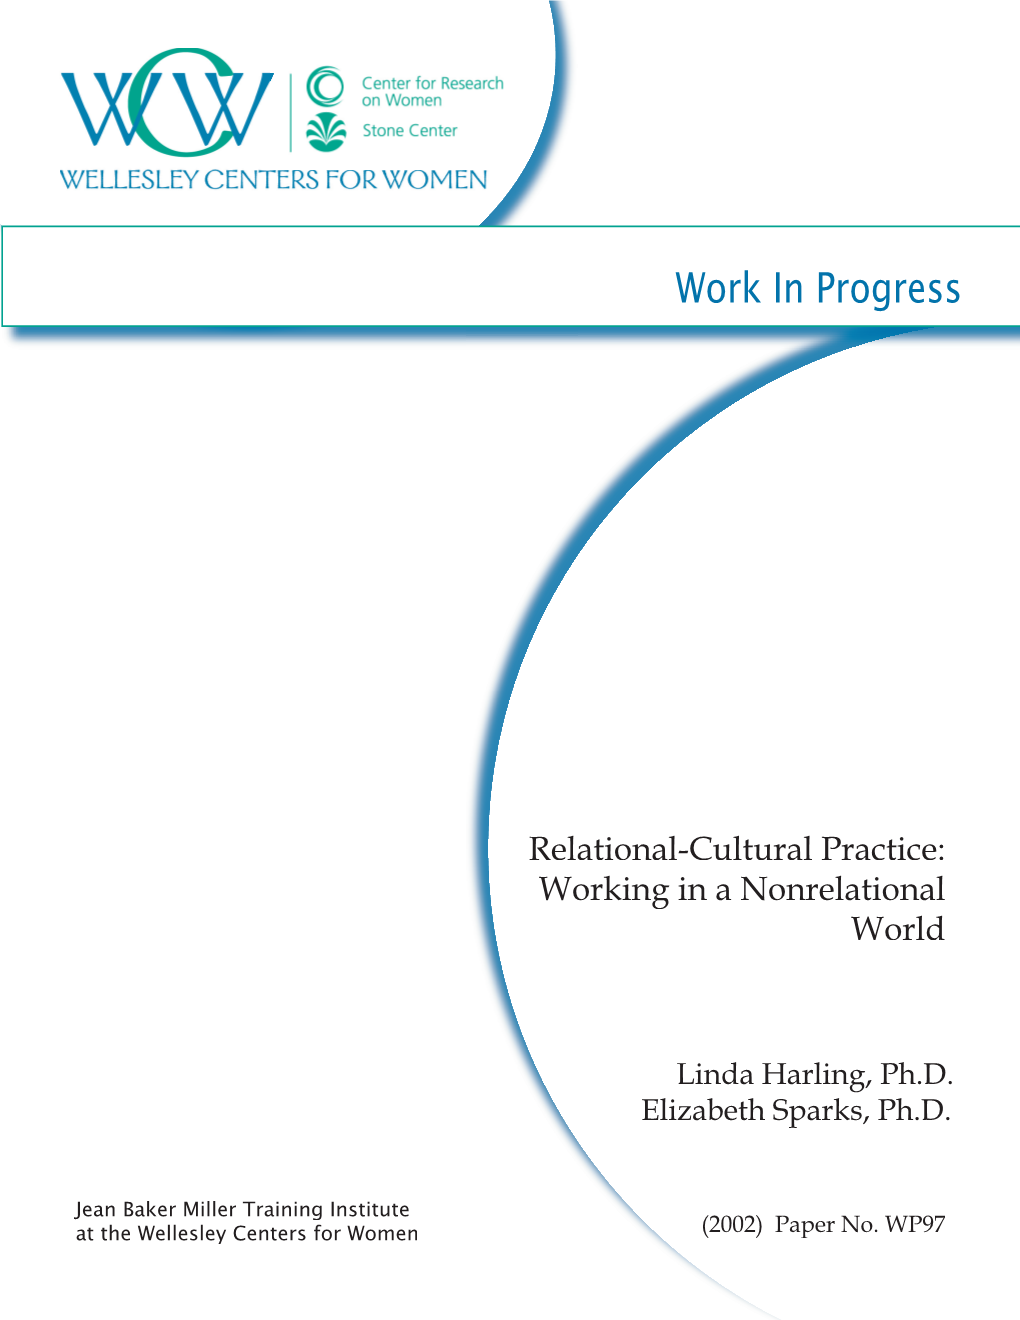 Relational-Cultural Practice: Working in a Nonrelational World